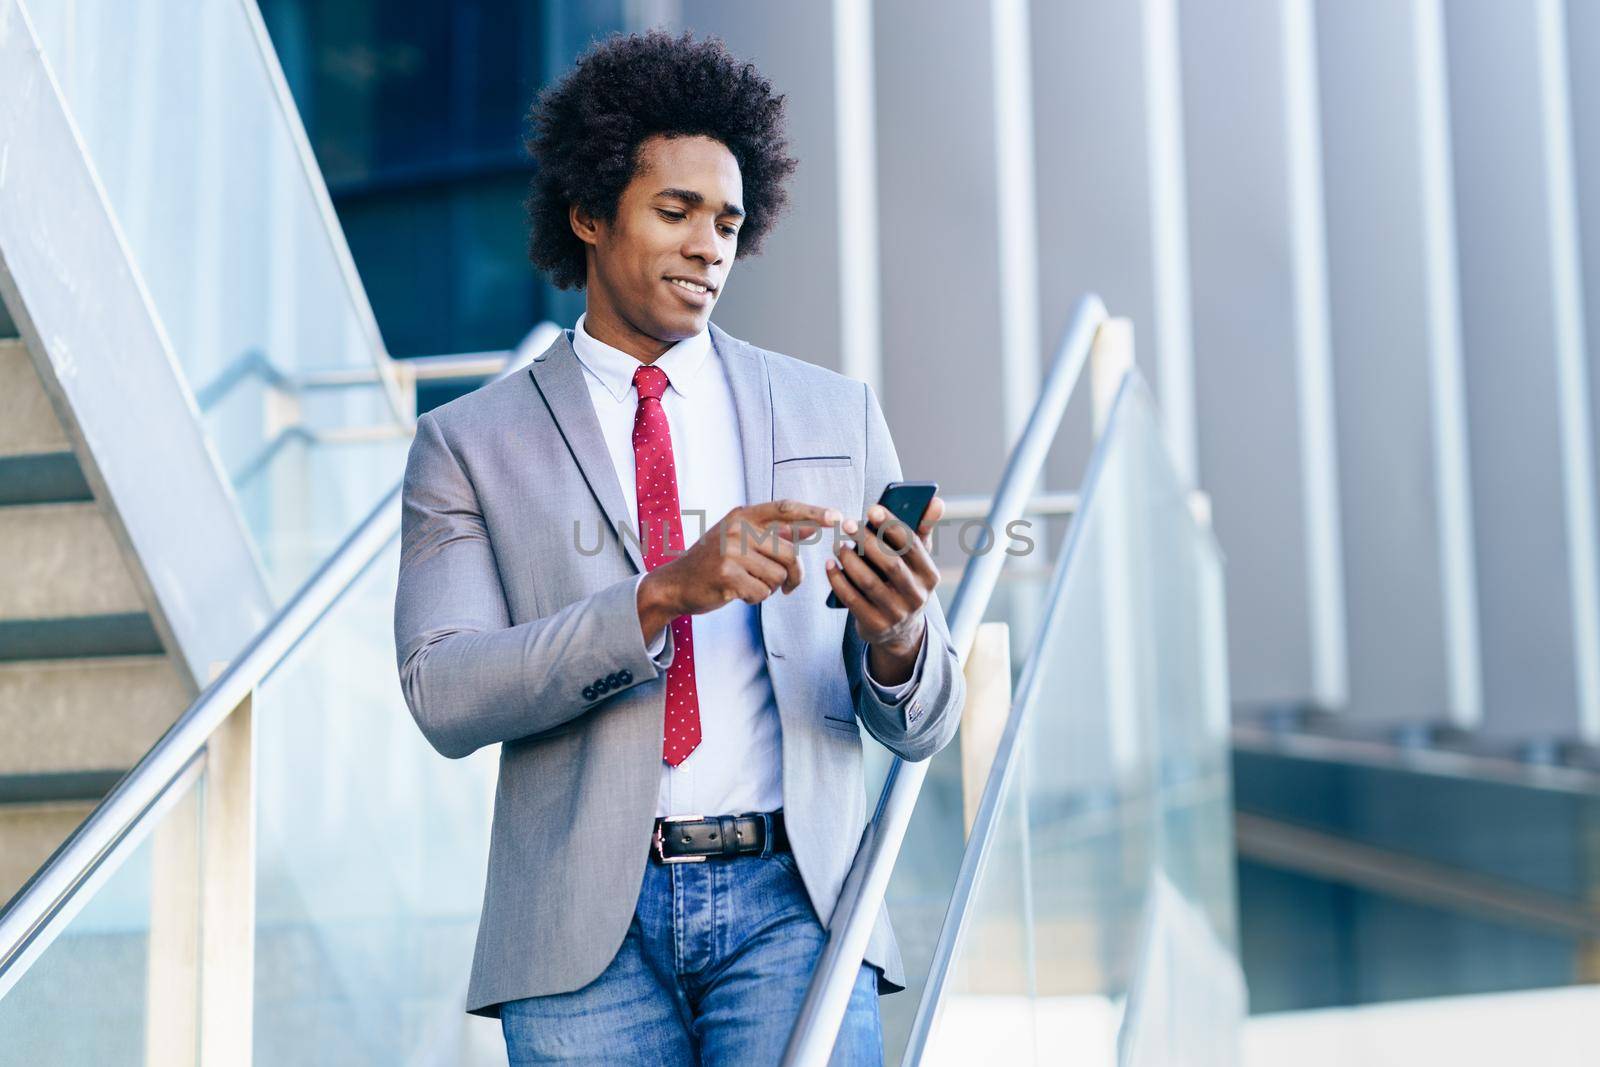 Black Businessman using his smartphone near an office building. Man with afro hair.